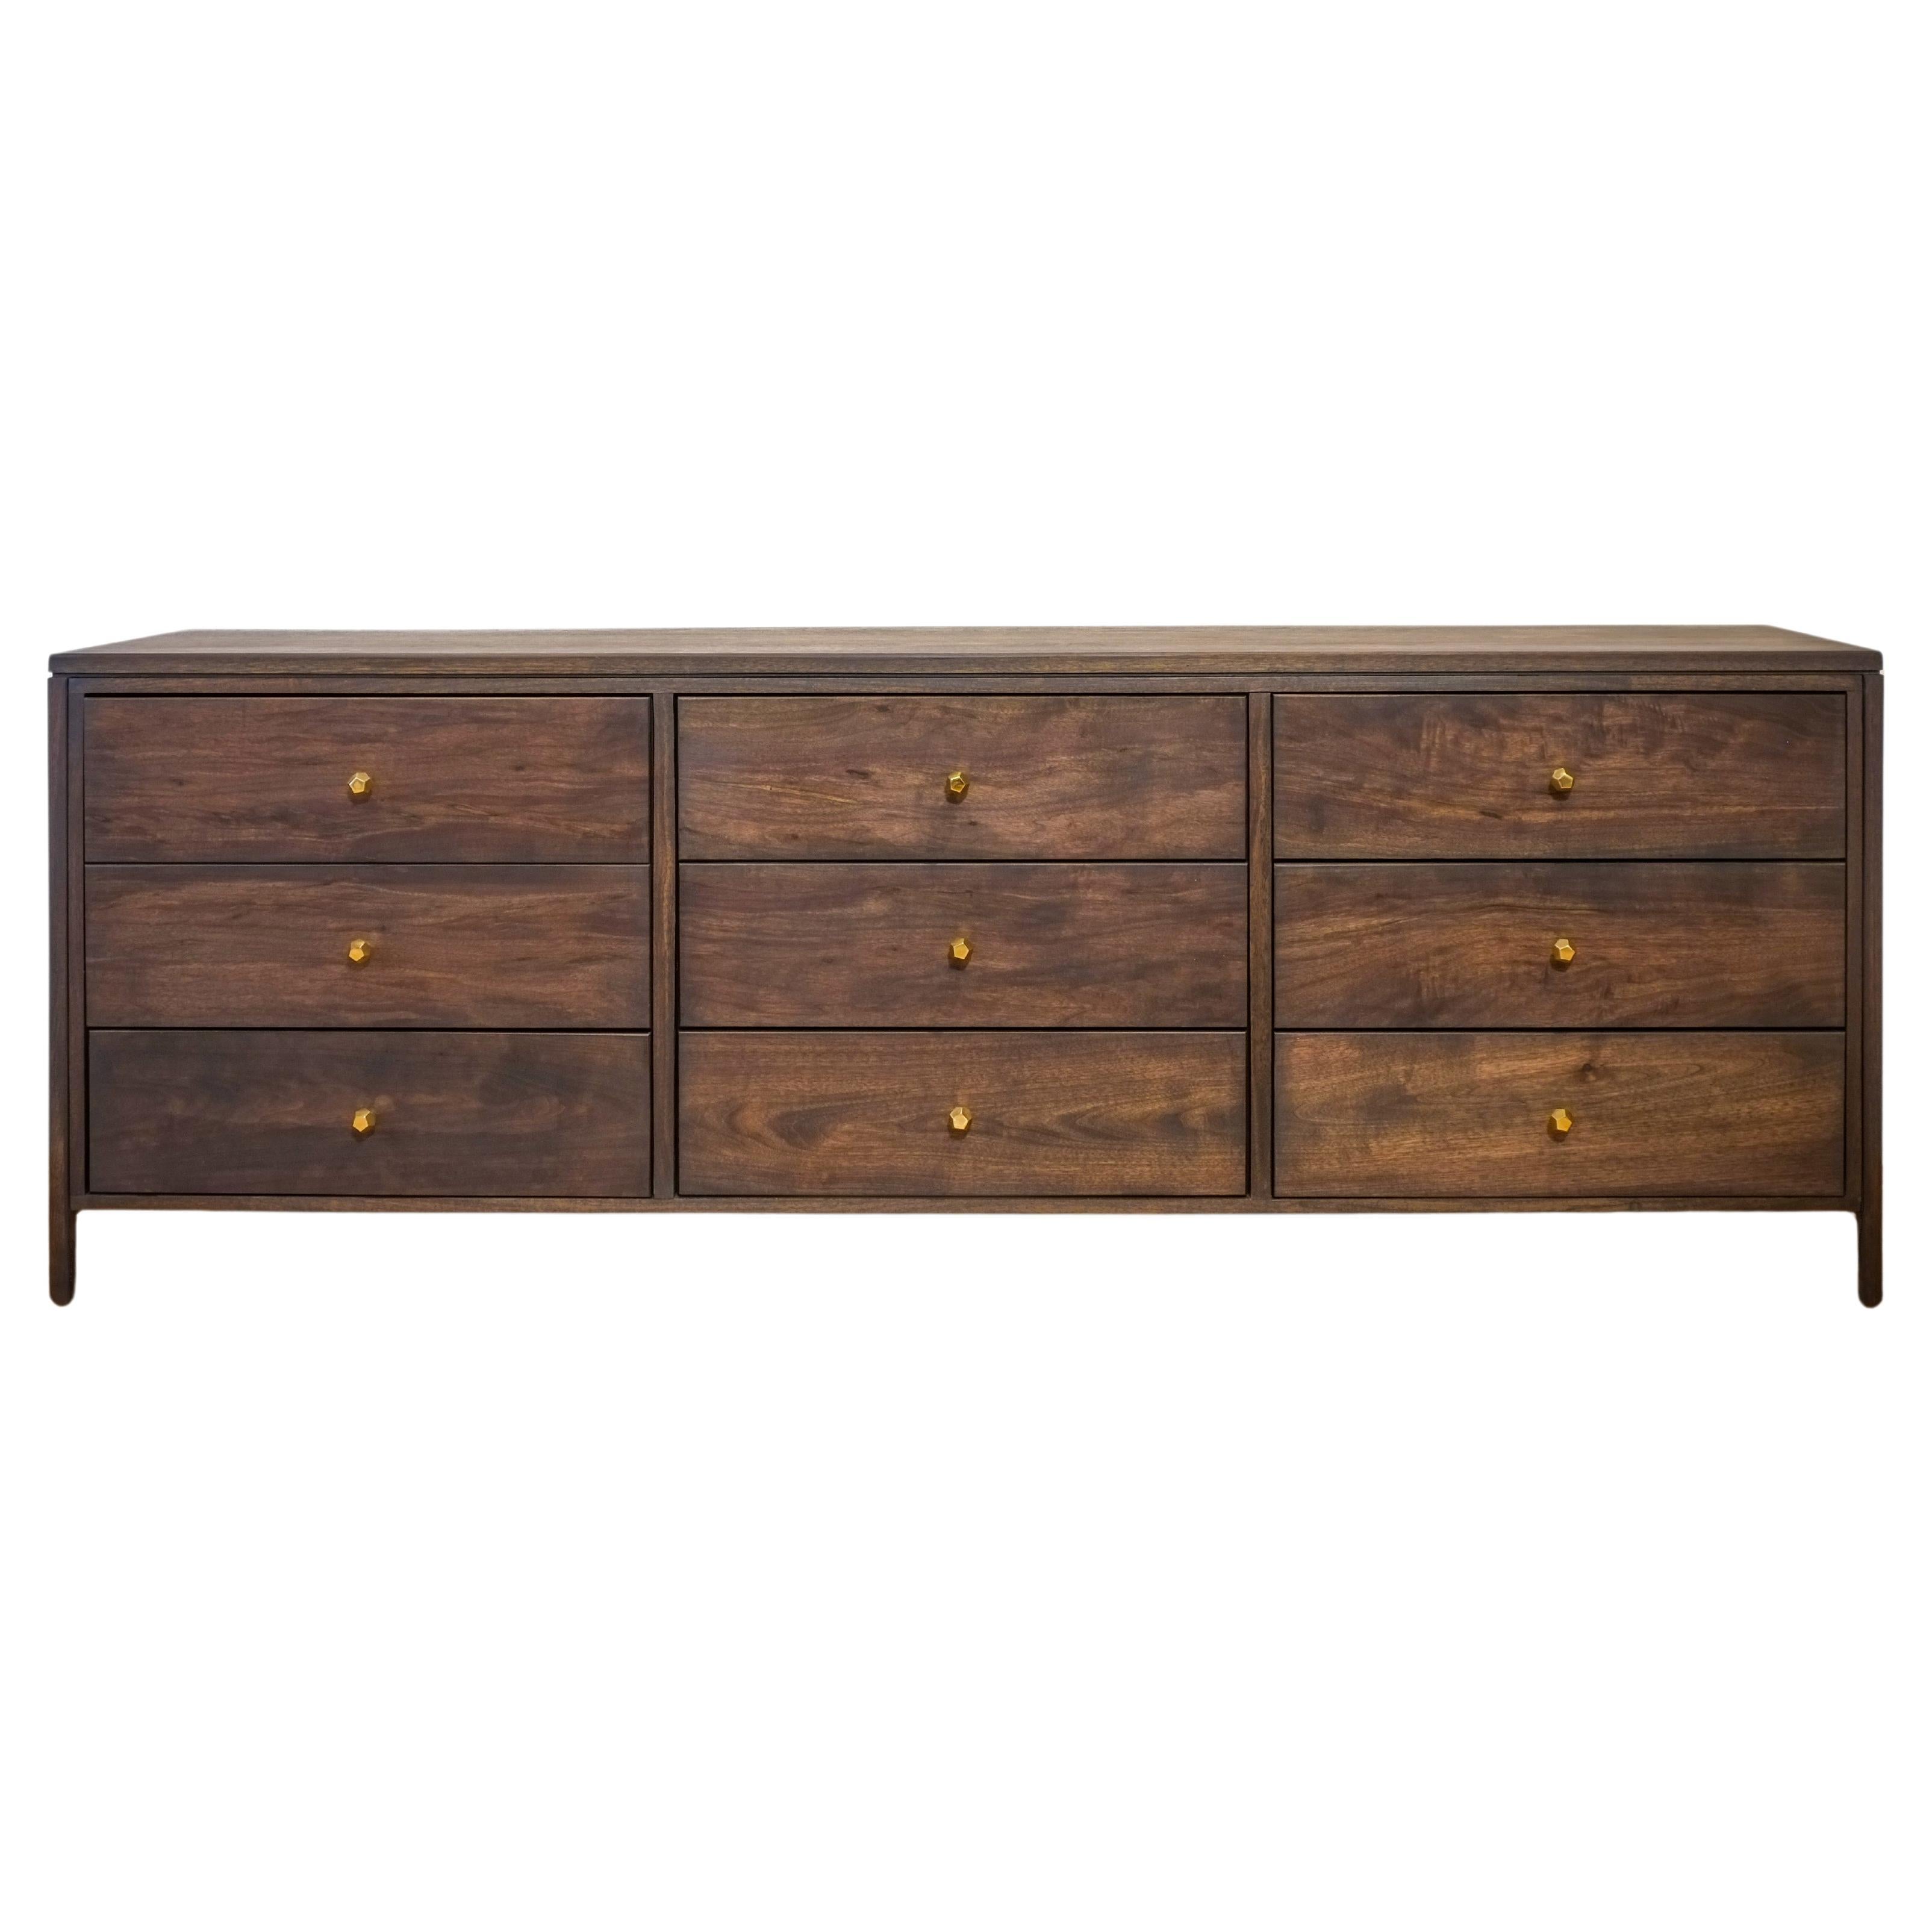 Walnut Dresser Continuous Grain Drawer Fronts Bookmatched For Sale